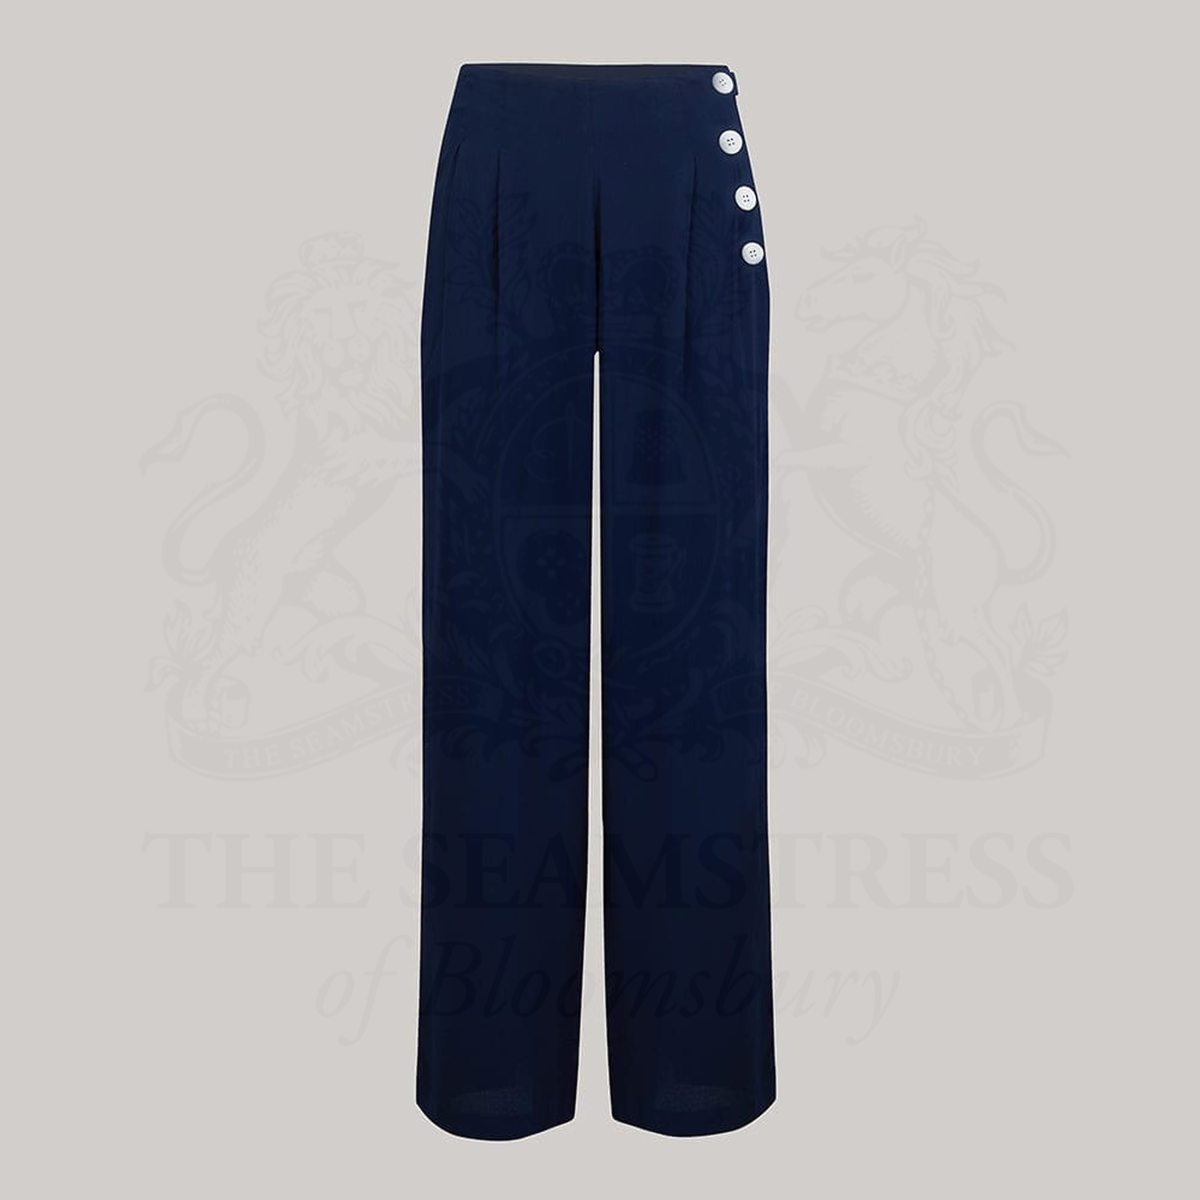 Wide-leg 1940s women’s trousers in navy blue. Four decorative buttons are down the left from the waist with a hidden zip in the side seam. 